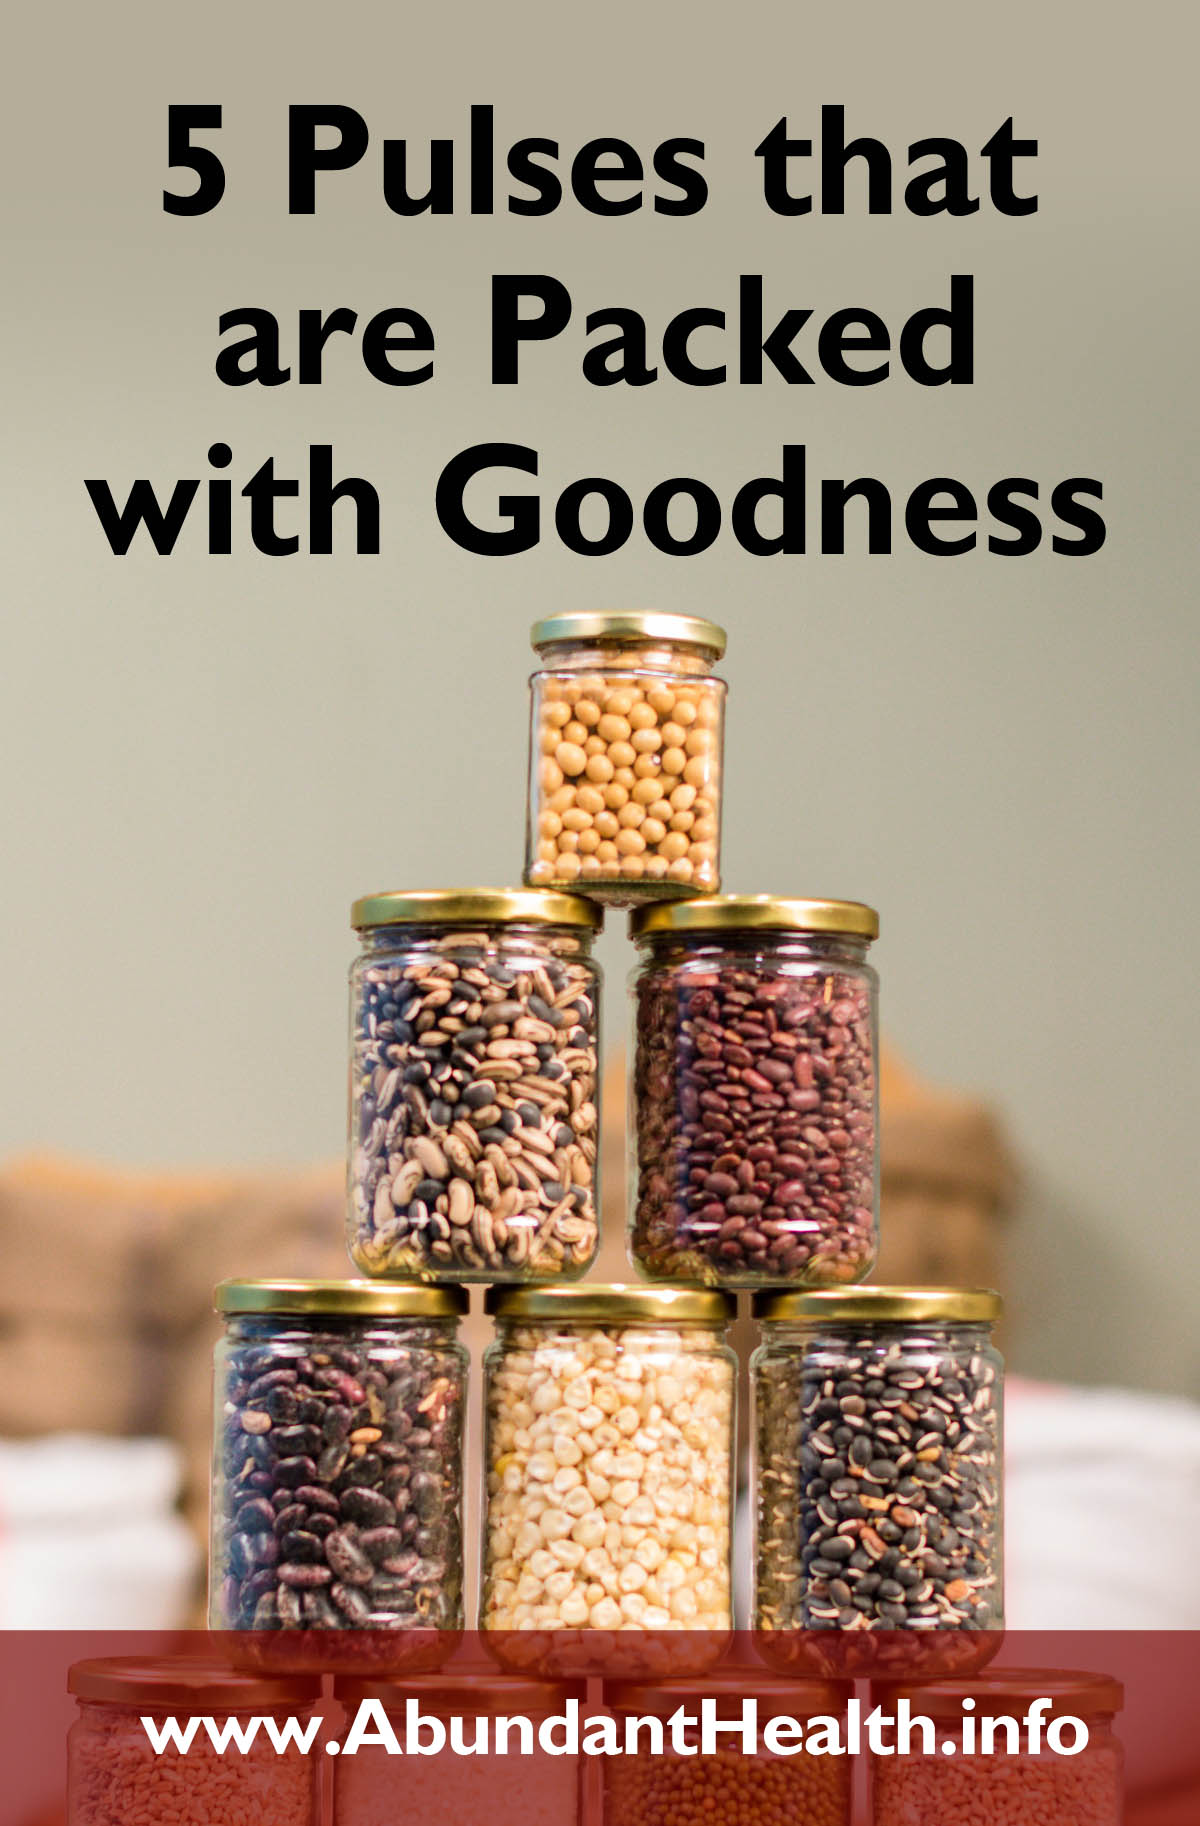 5 Pulses that are Packed with Goodness